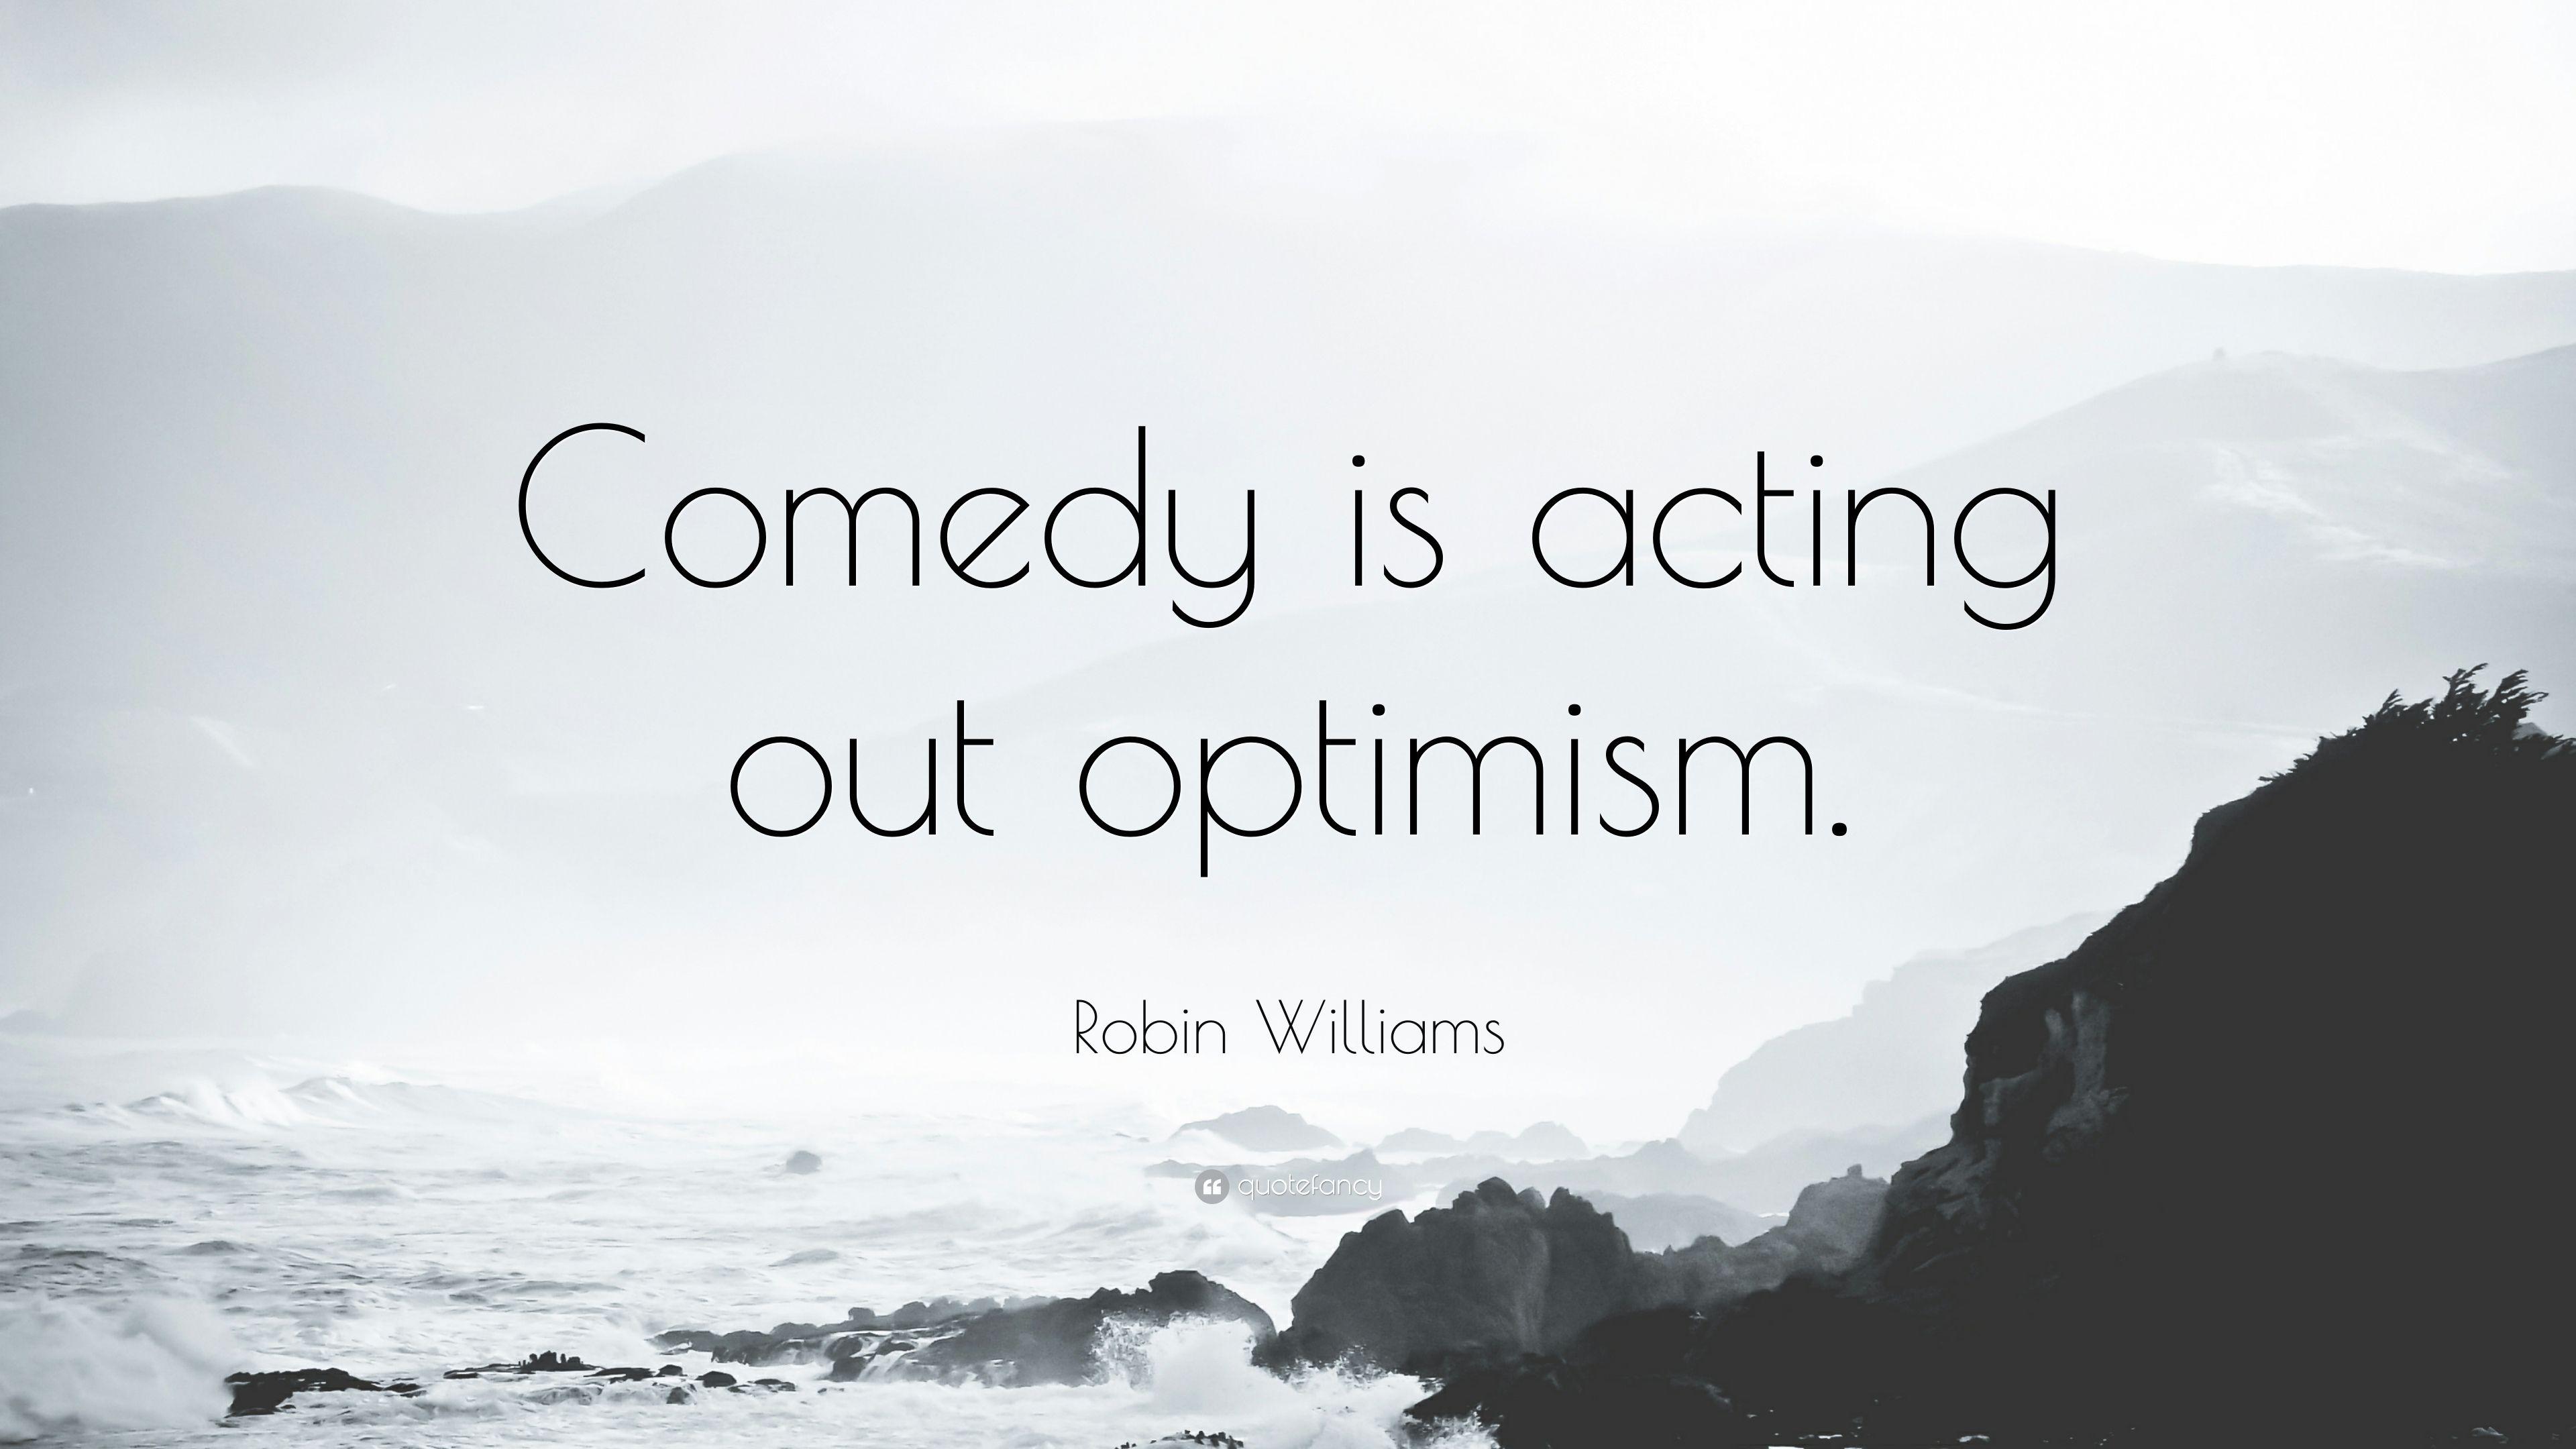 Robin Williams Quote: “Comedy is acting out optimism.” 13